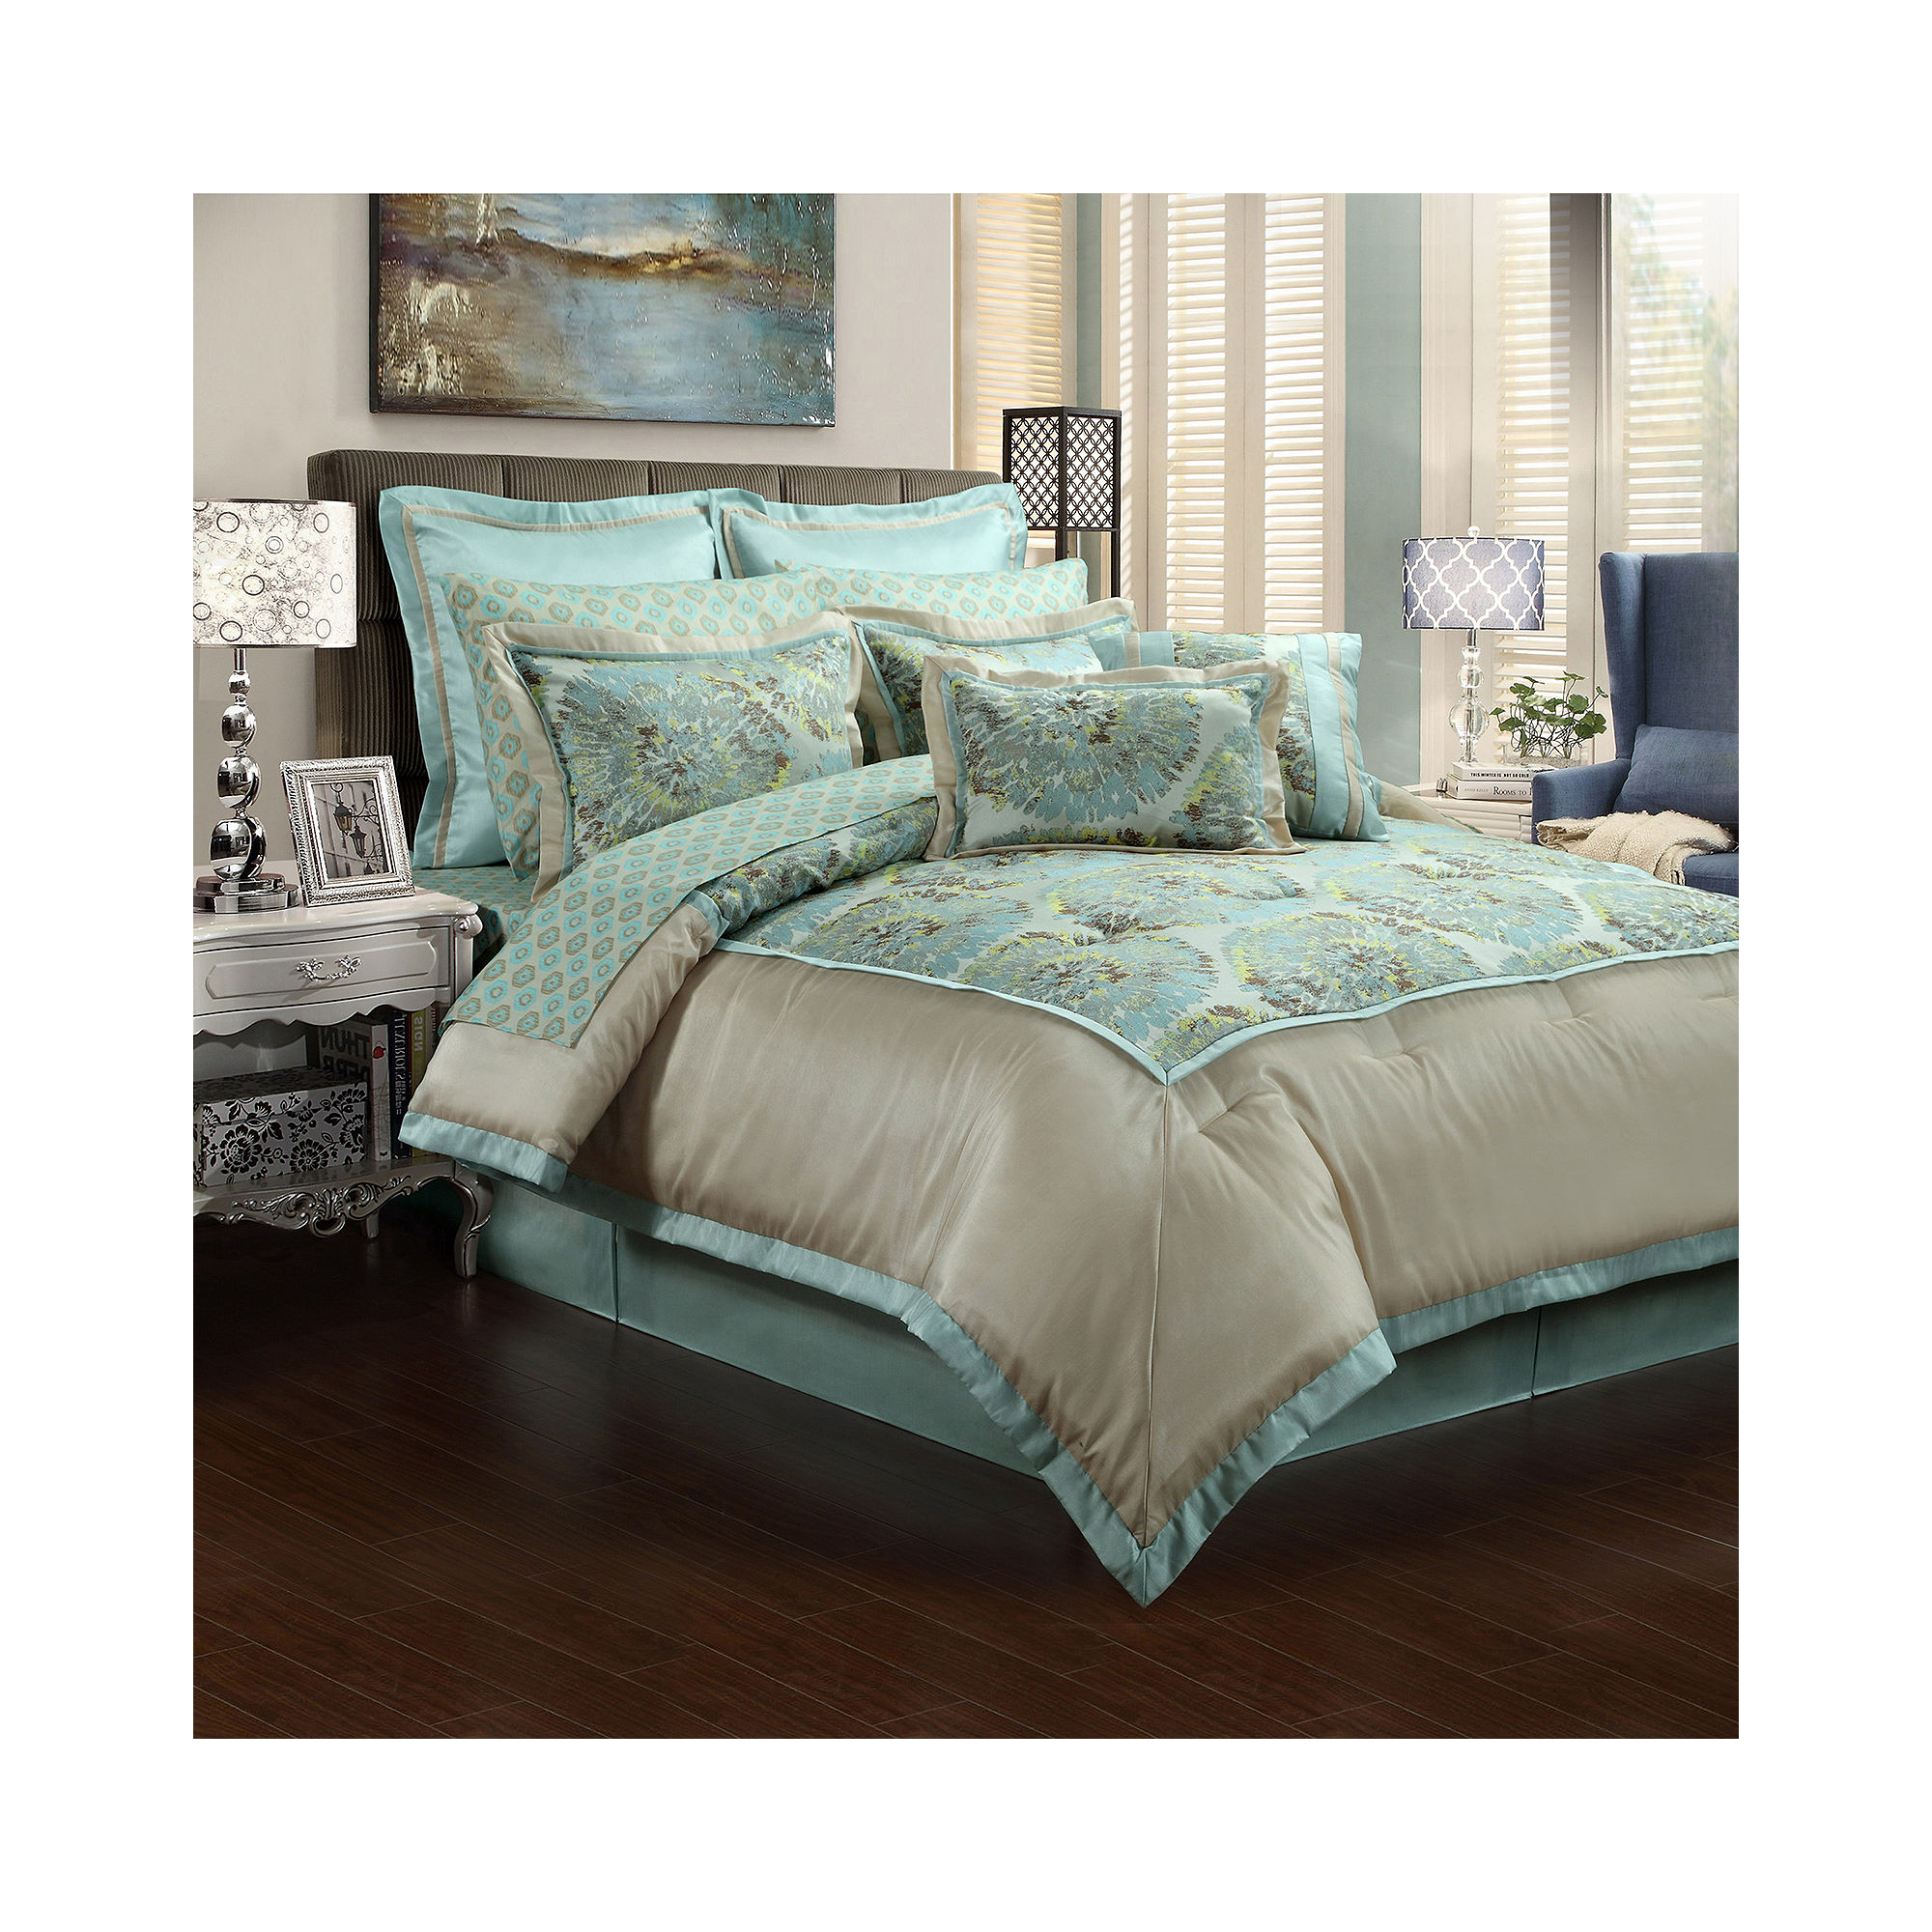 Metropolitan 12-pc. Complete Bedding Set with Sheets